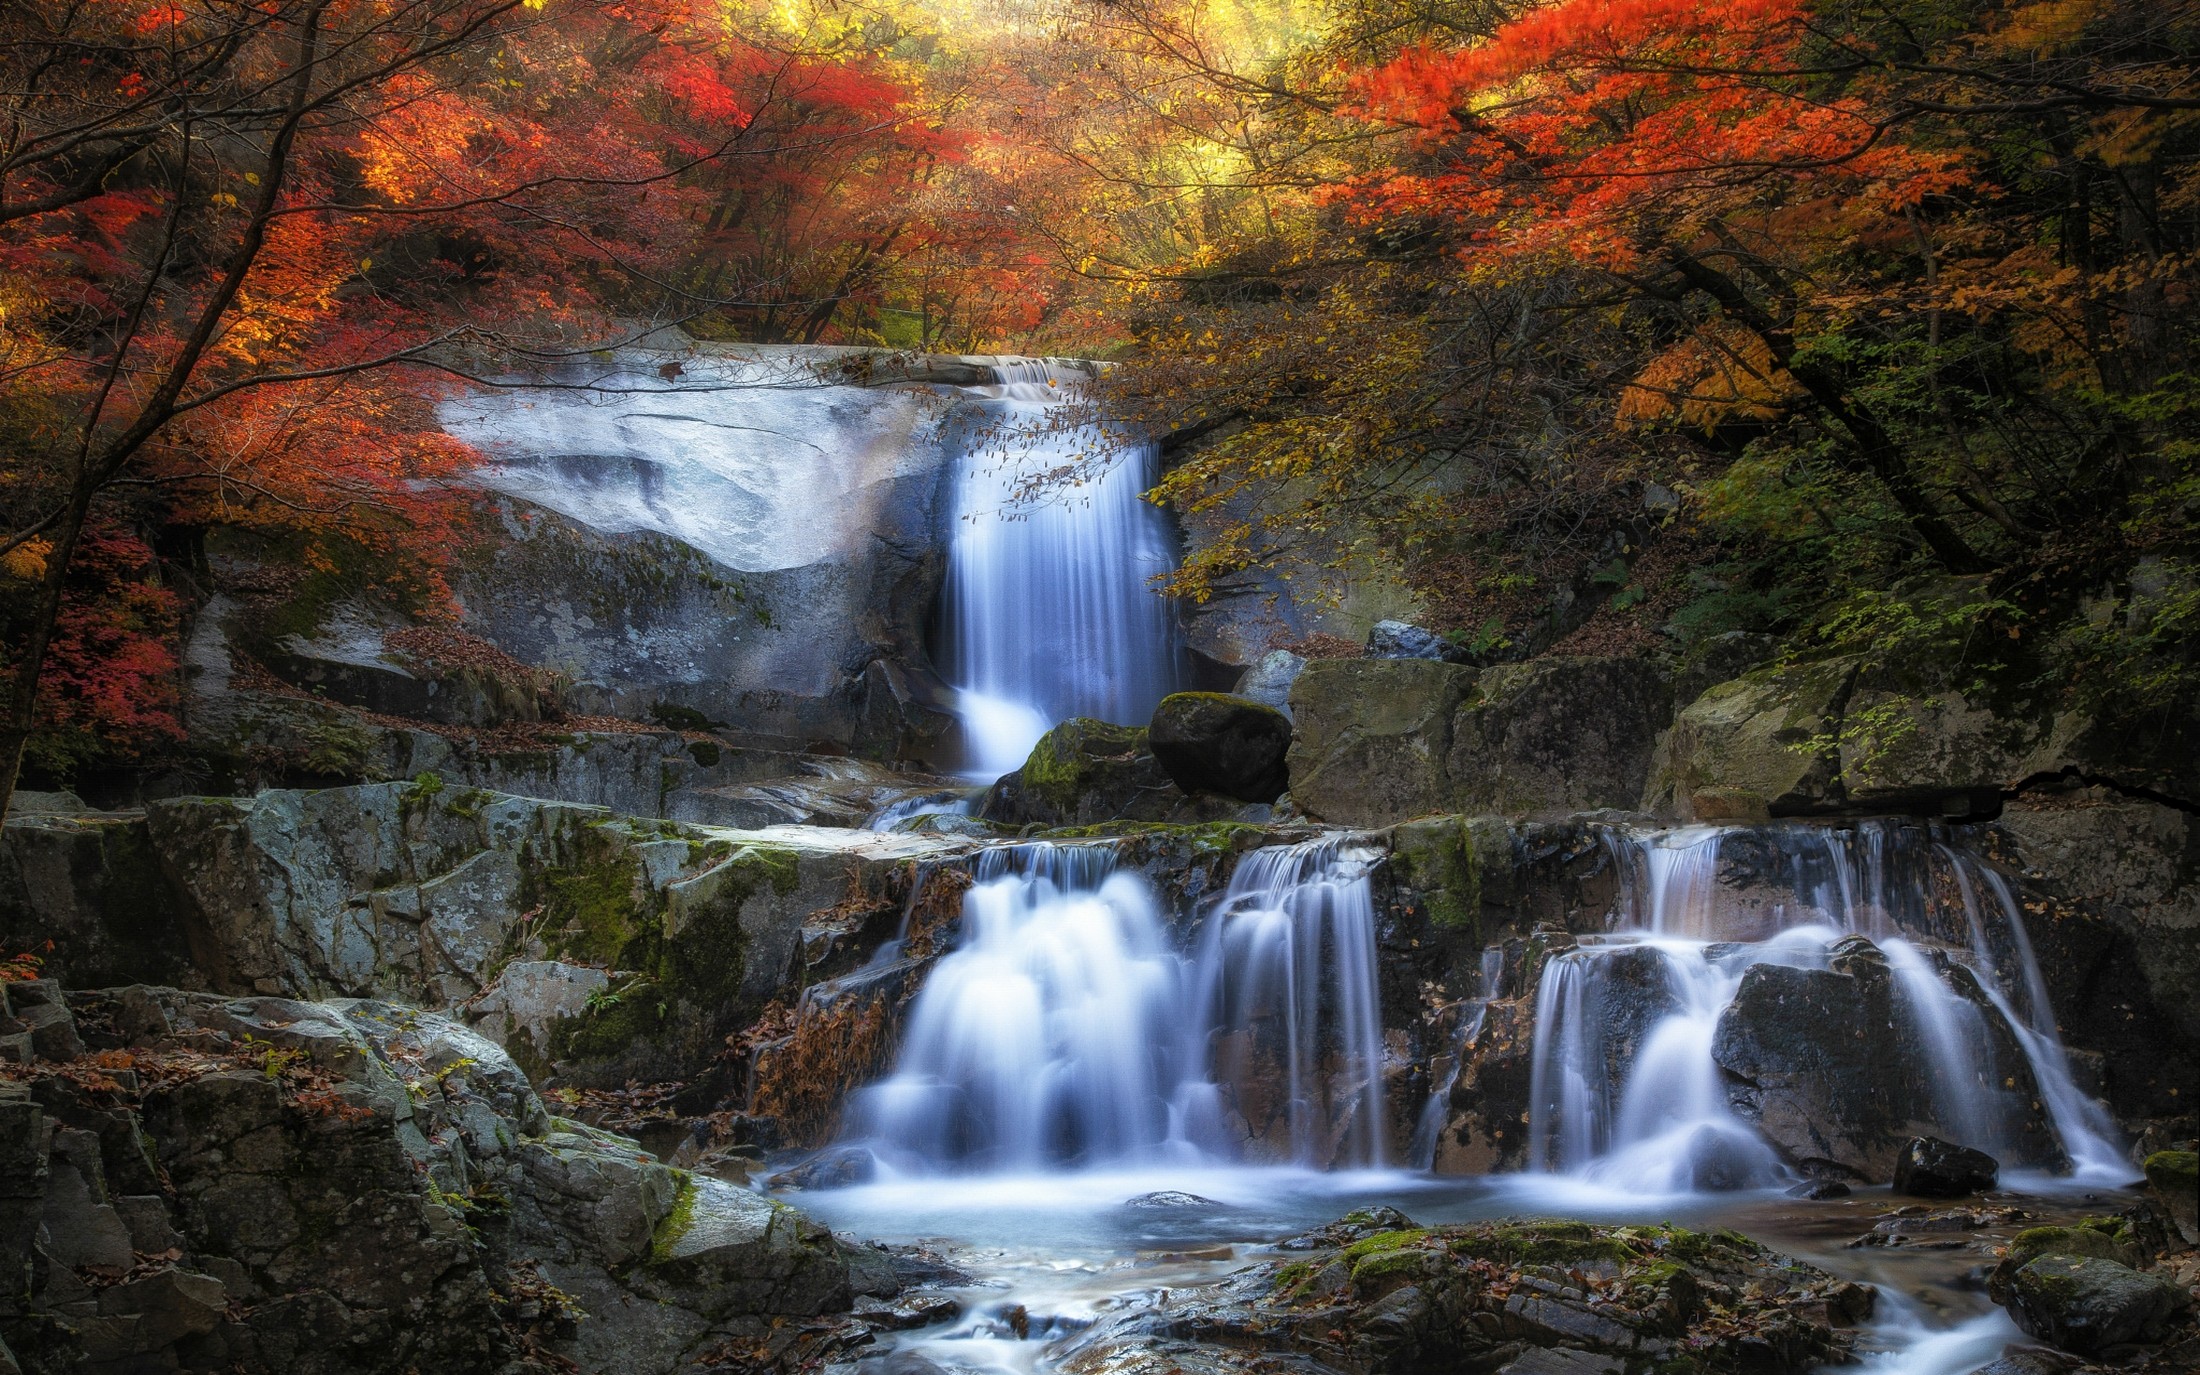 General 2200x1375 nature landscape fall waterfall colorful forest leaves moss trees